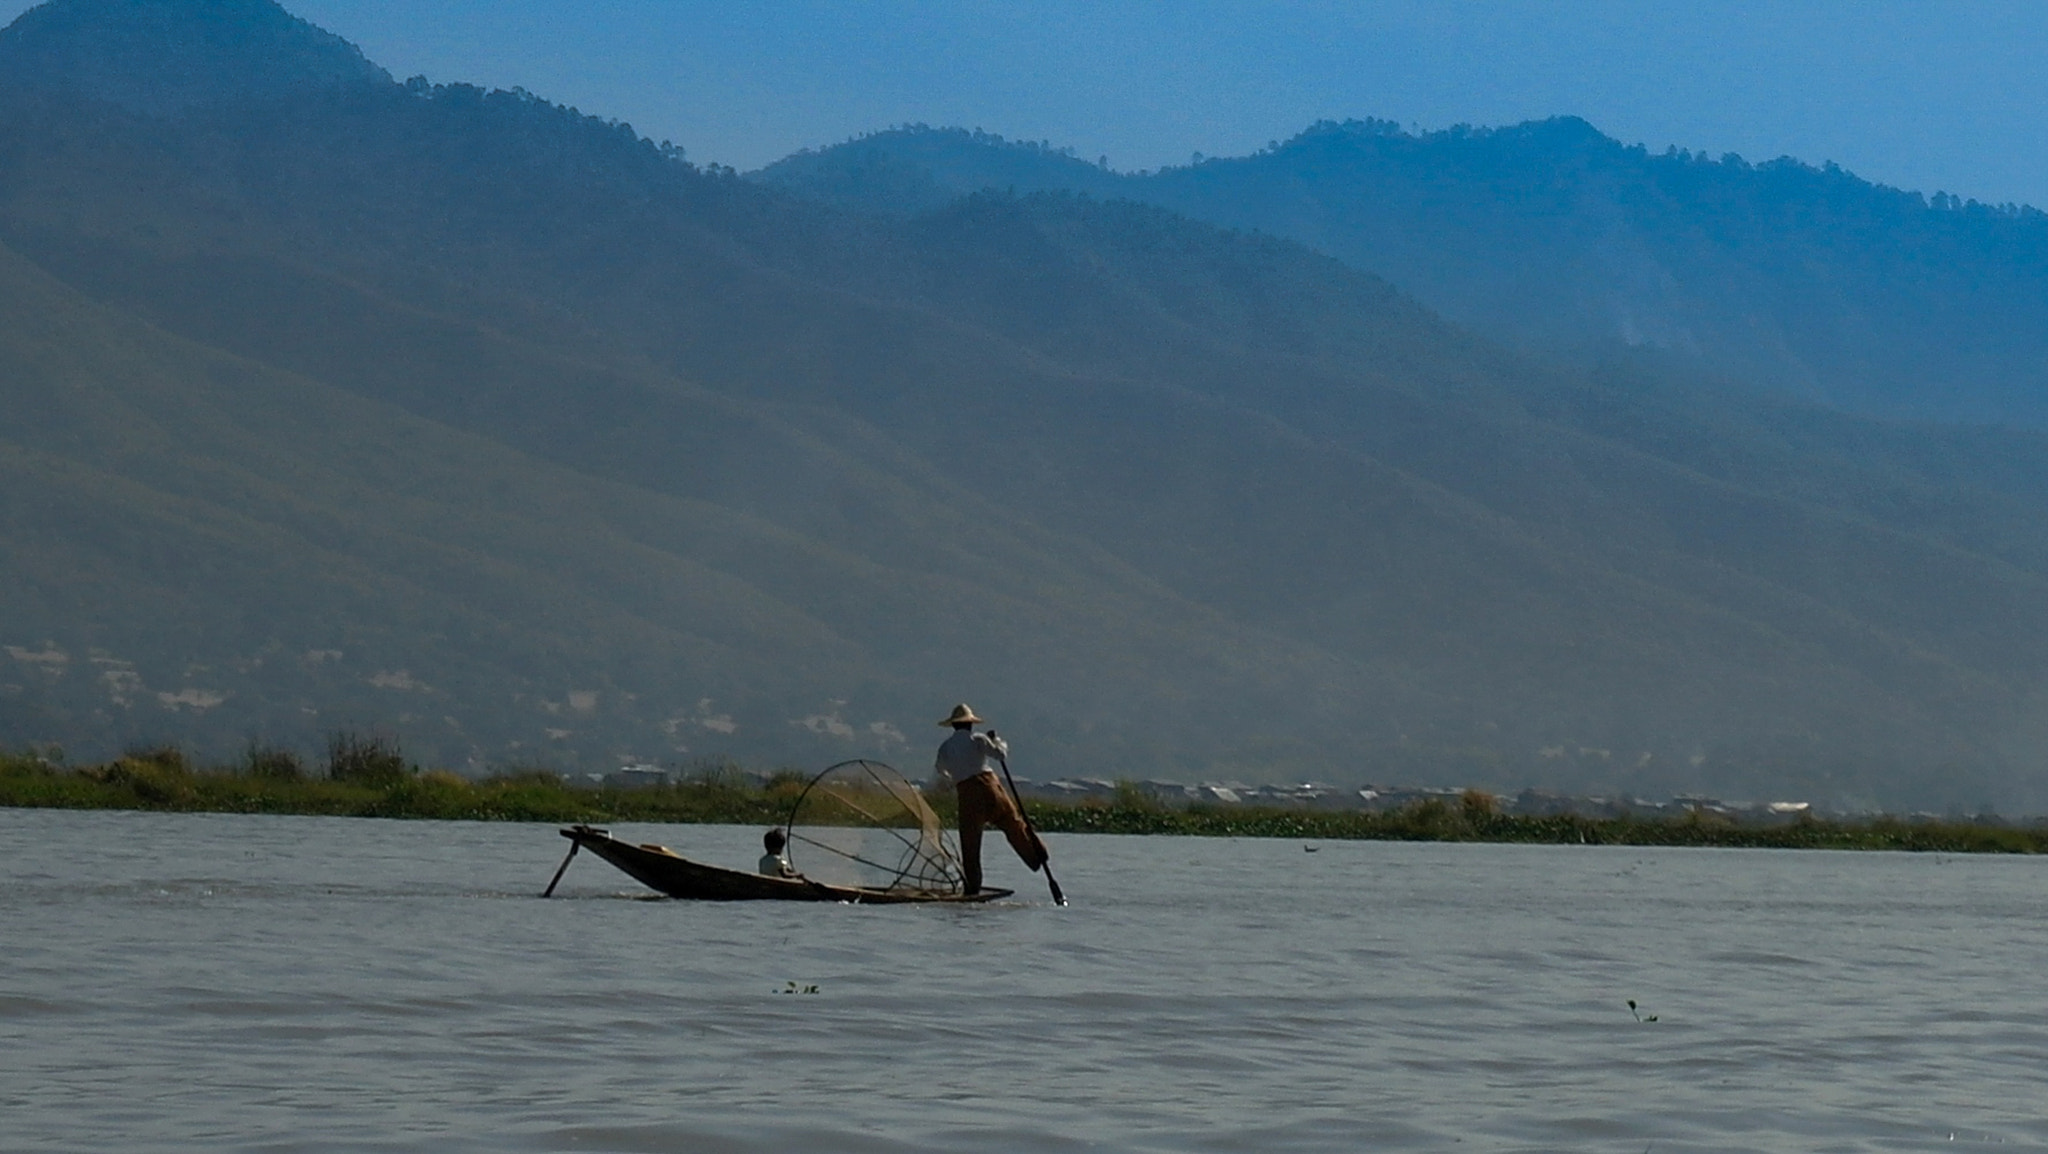 Samsung NX11 sample photo. Fisherman on the boat at the sunrise, inle lake myanmar photography